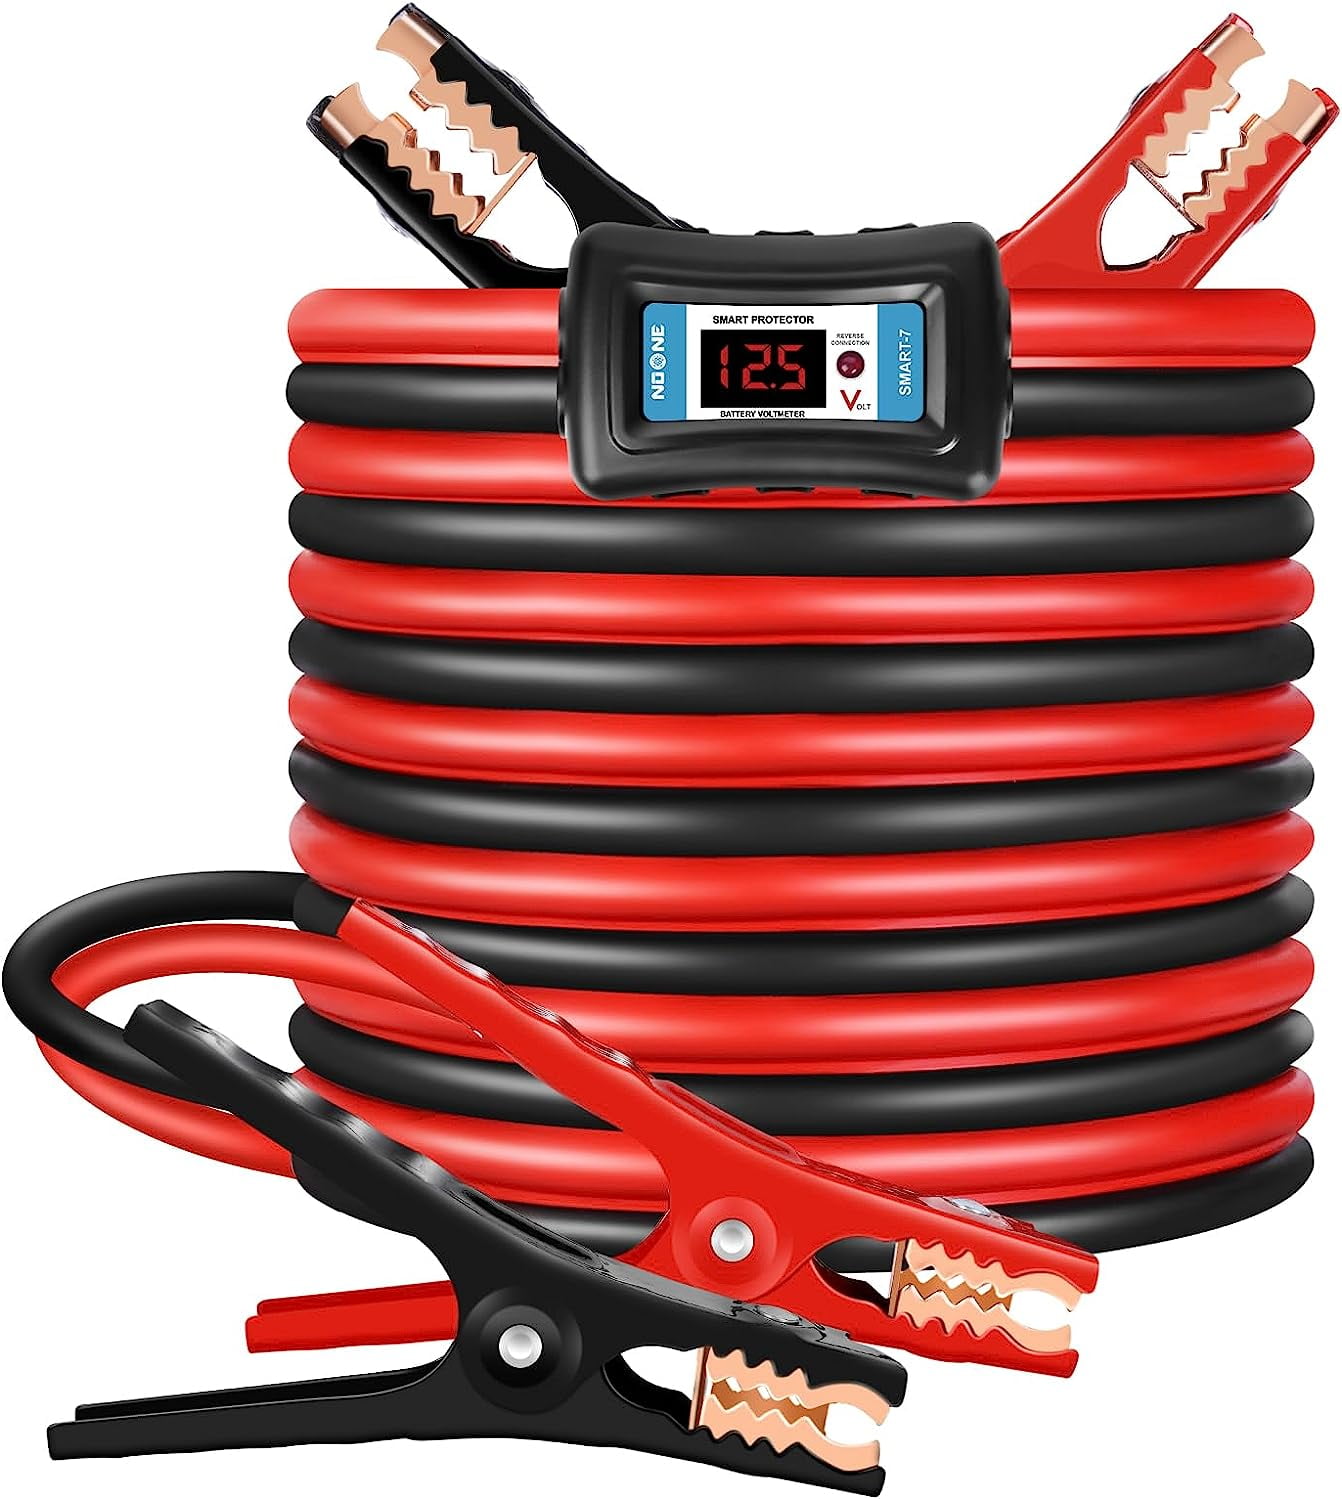  10 Gauge Jumper Cables - 12ft Jump Starter Cable for Compact  Cars and Light Recreational Vehicles - Car Accessories by Stalwart :  Automotive